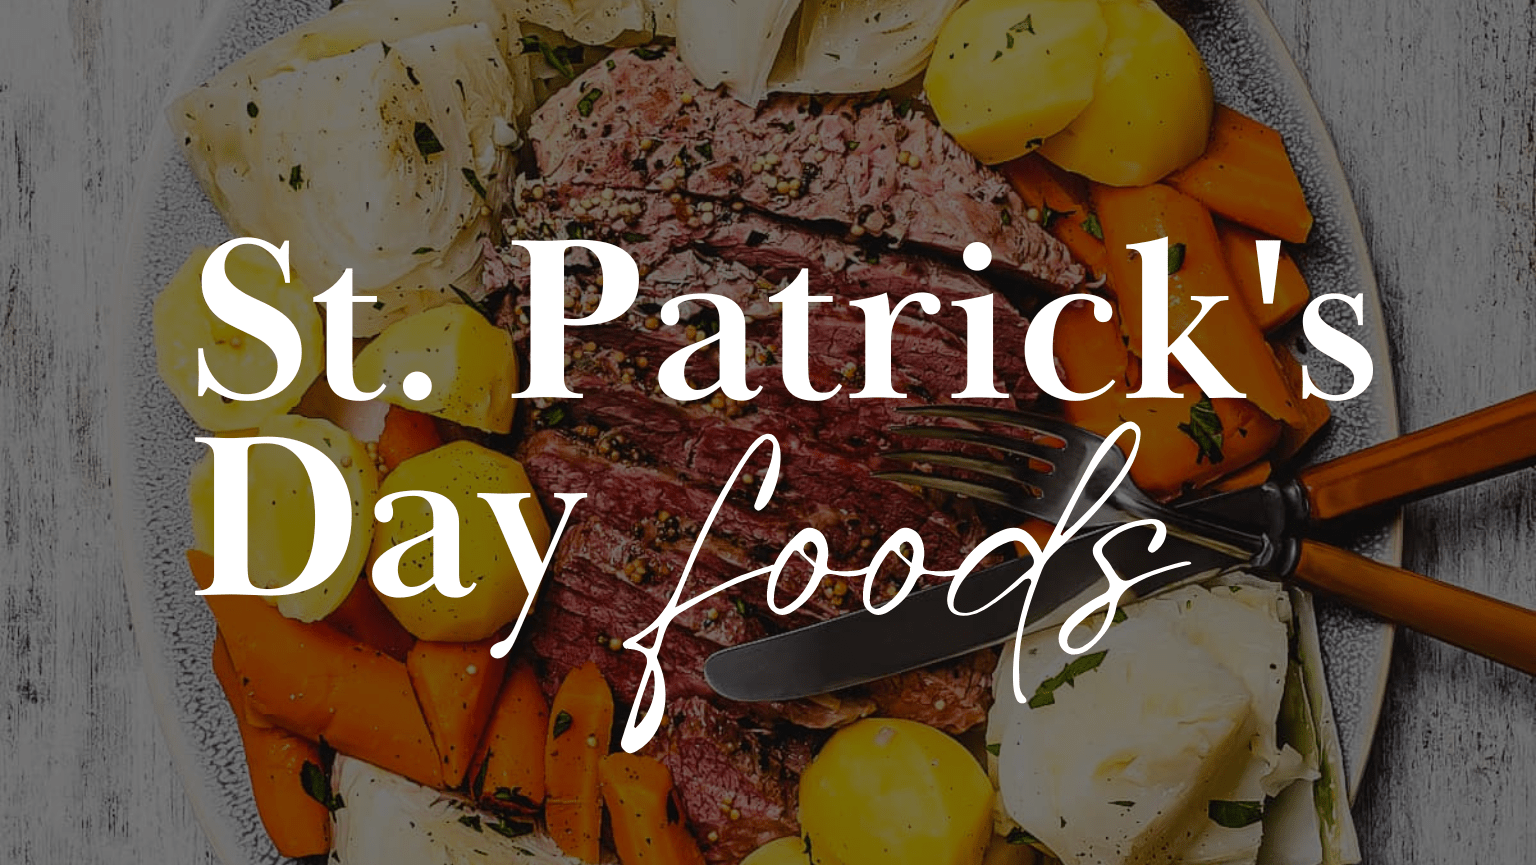 St. Patricks Day recipes food not corned beef